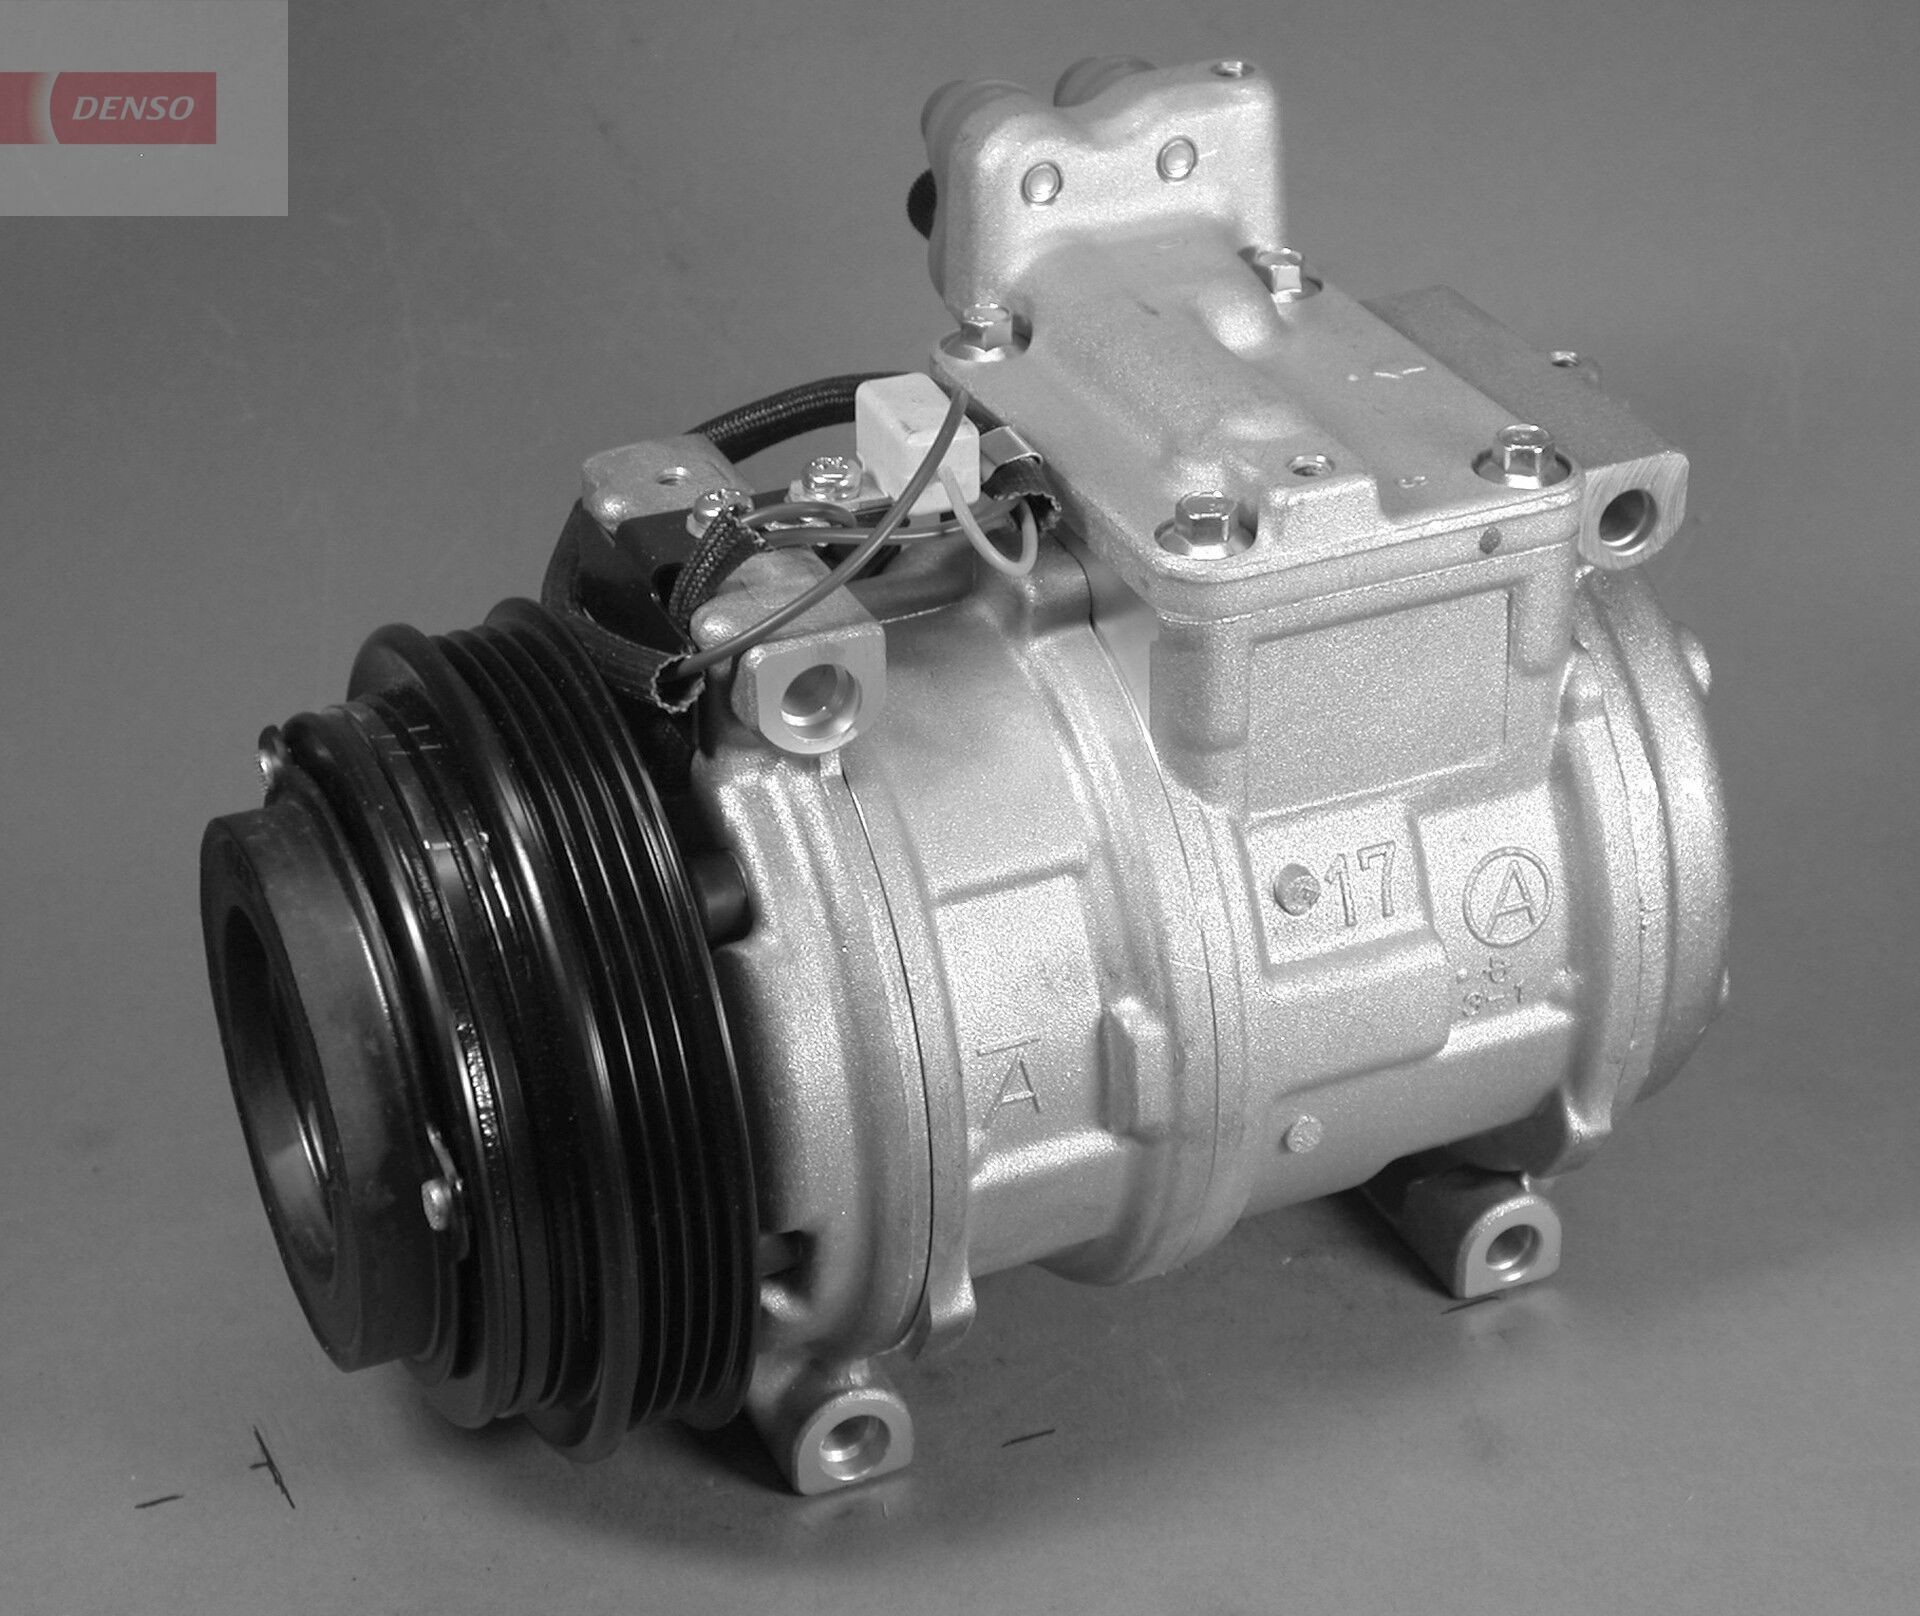 DENSO DCP12005 Air conditioning compressor 10PA17C, 12V, PAG 46, R 134a, with magnetic clutch